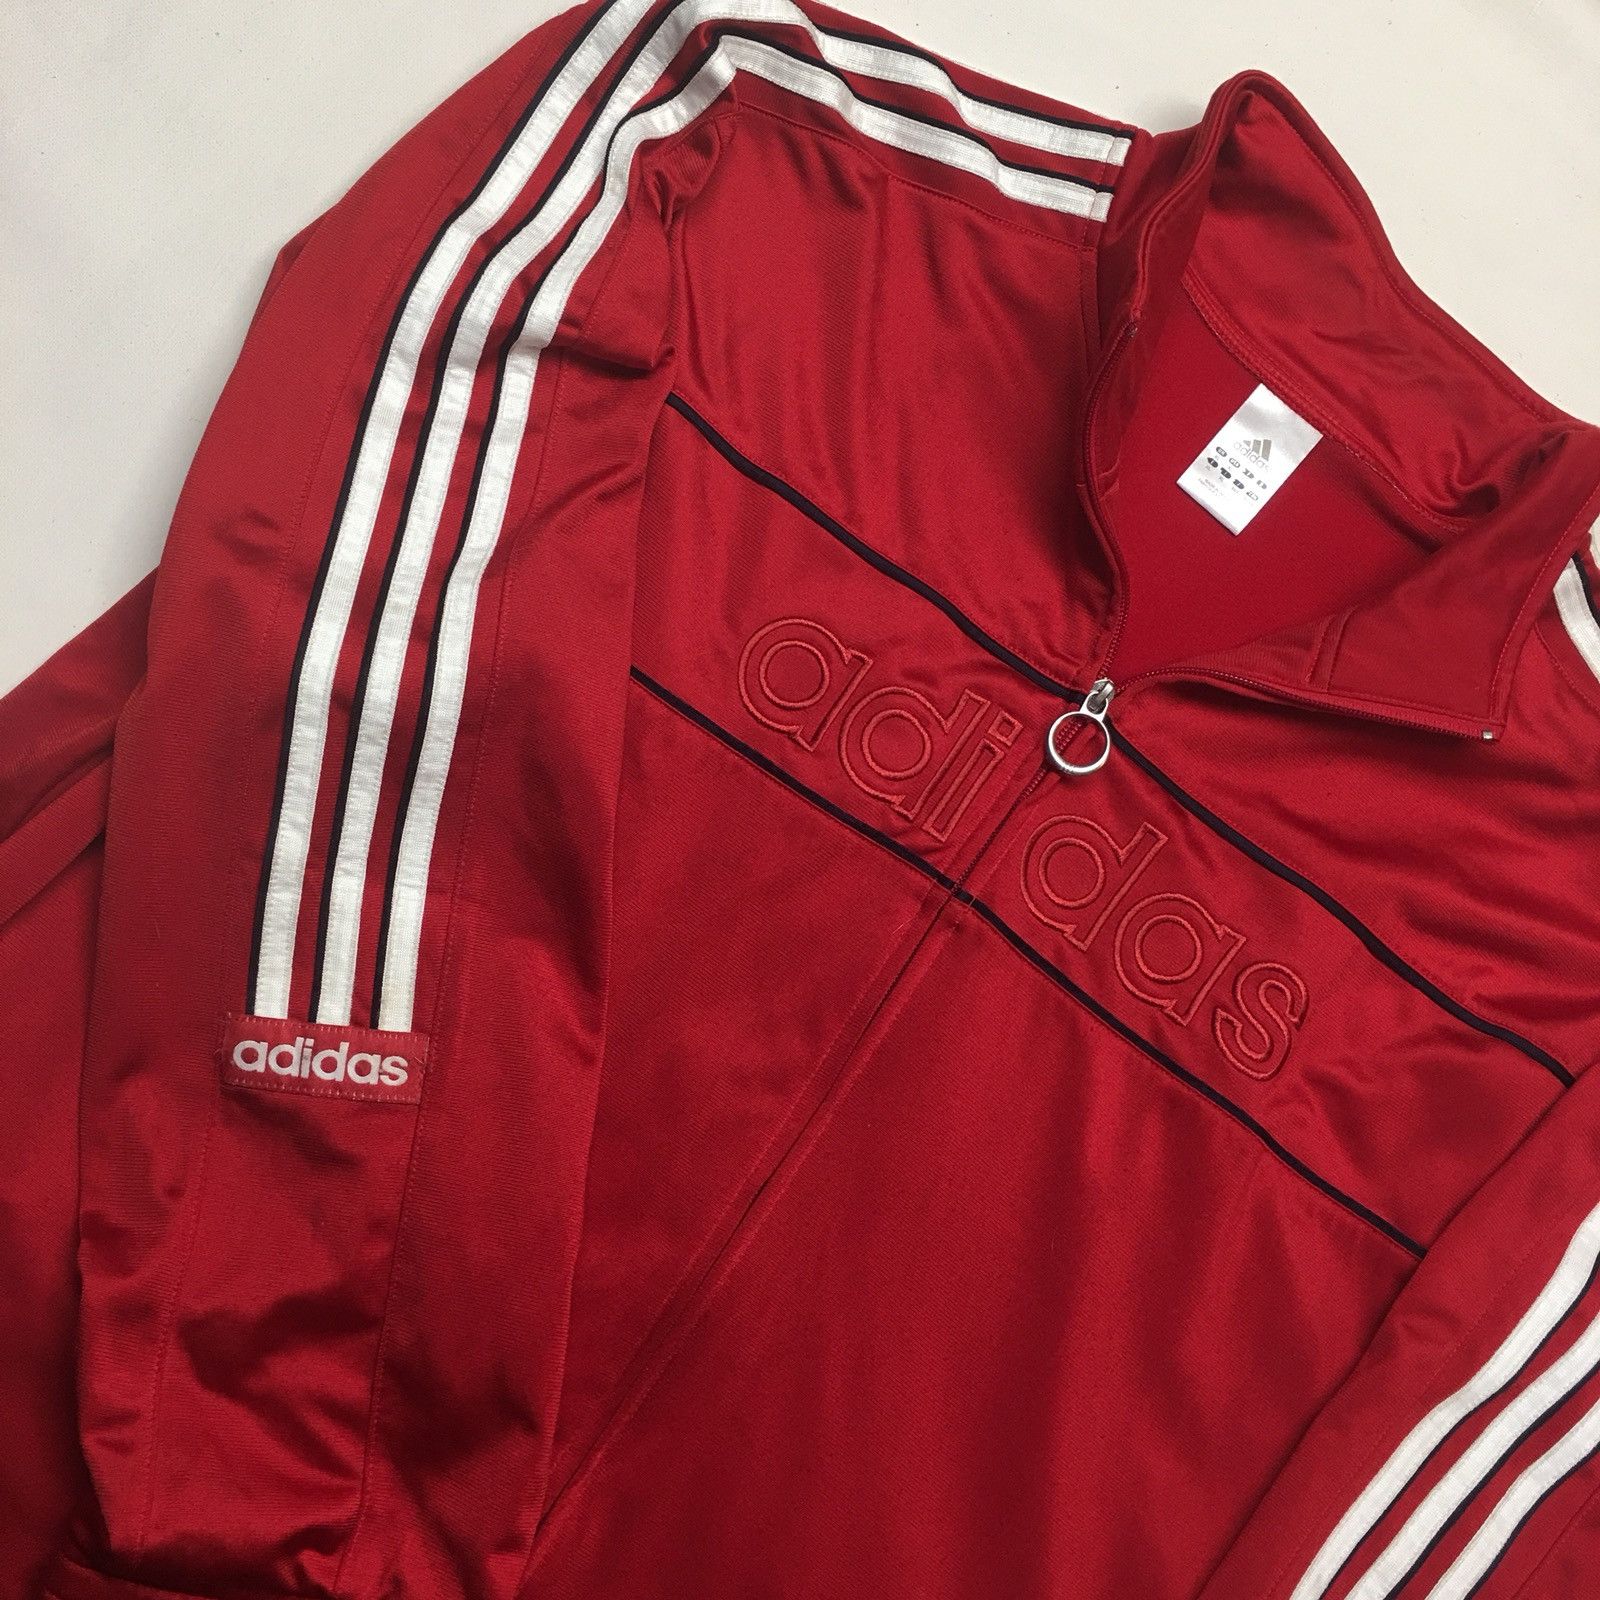 Adidas Early 90s Adidas Jacket Size US XL / EU 56 / 4 - 1 Preview